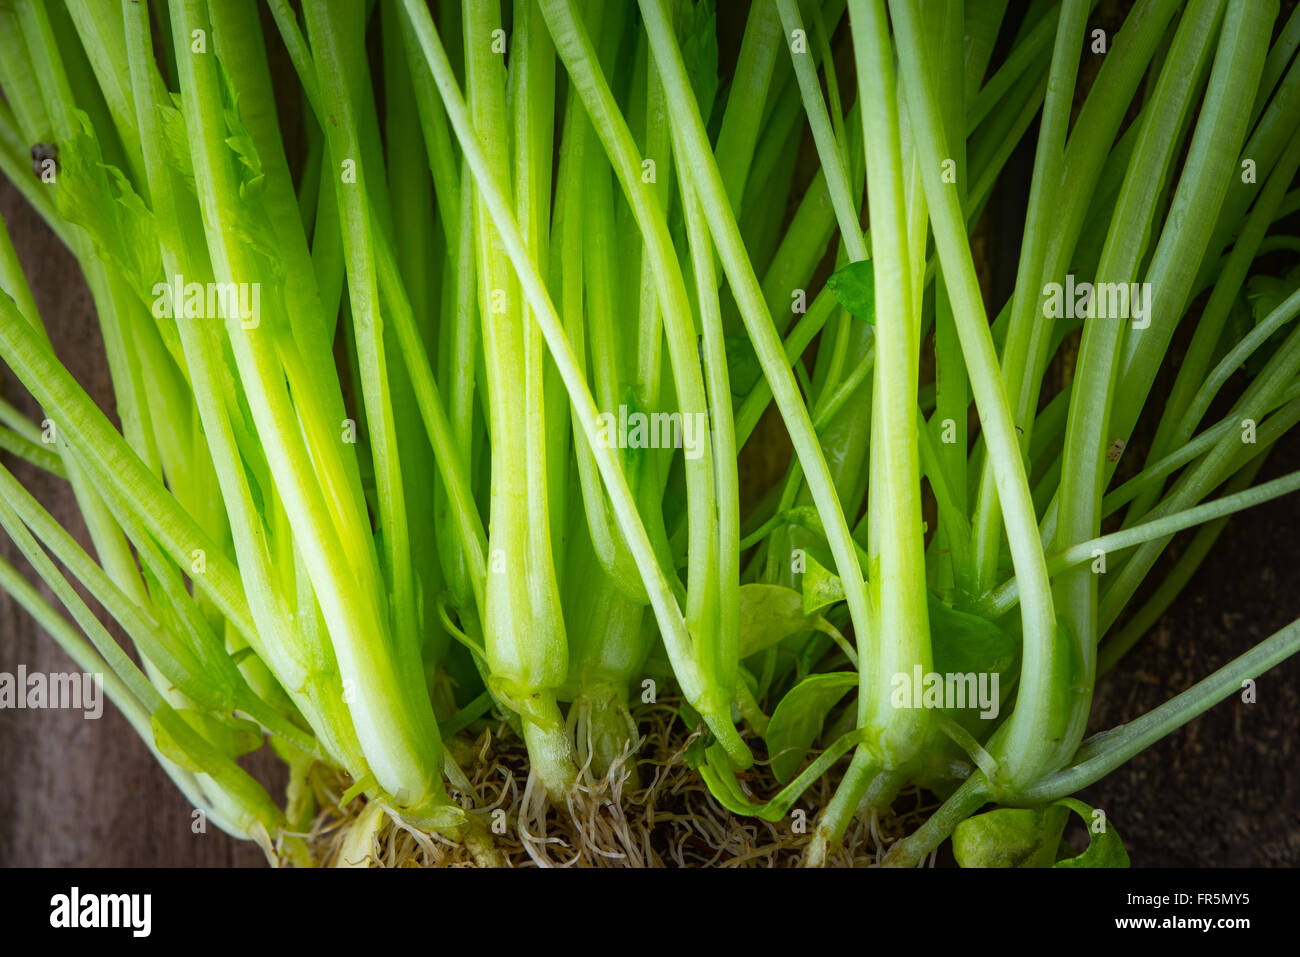 Green stems and roots of basil close up horizontal Stock Photo